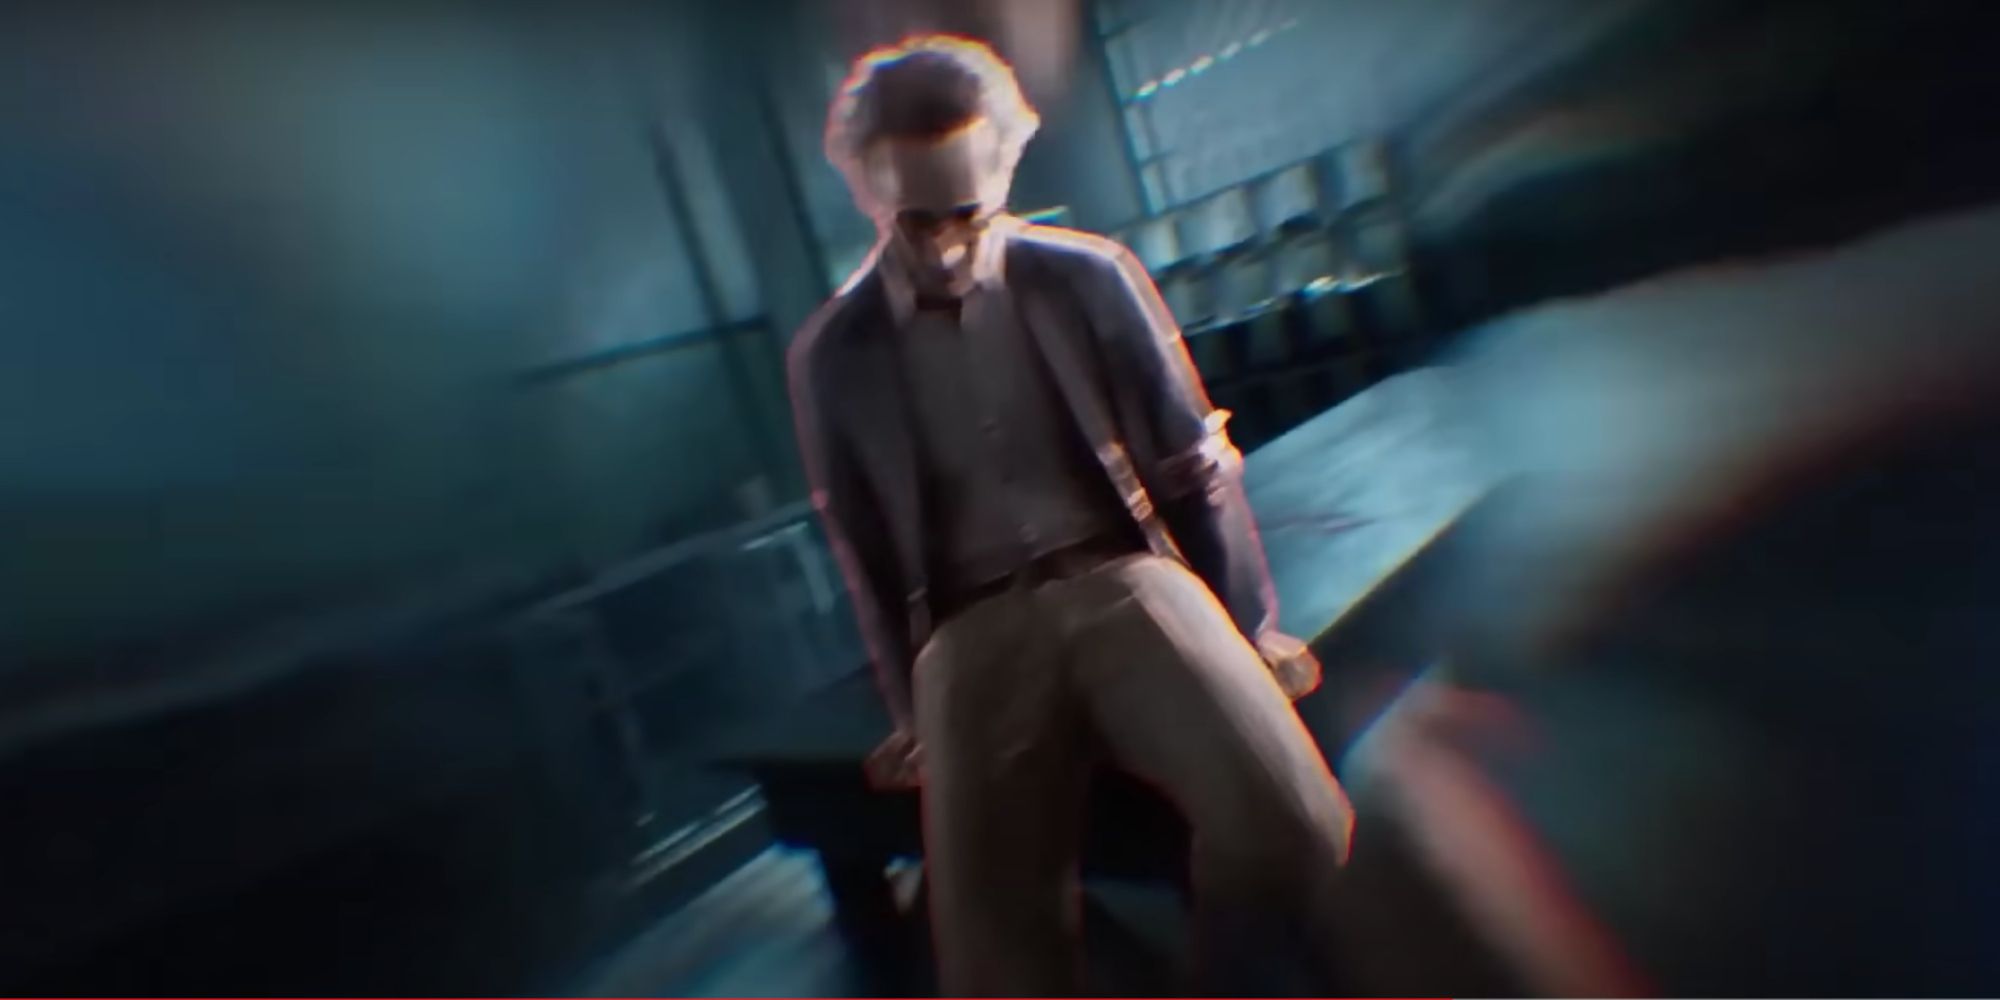 Dr. Taylor's blurry expression as he leans over his desk from someone else's perspective in the RE Death Island trailer.